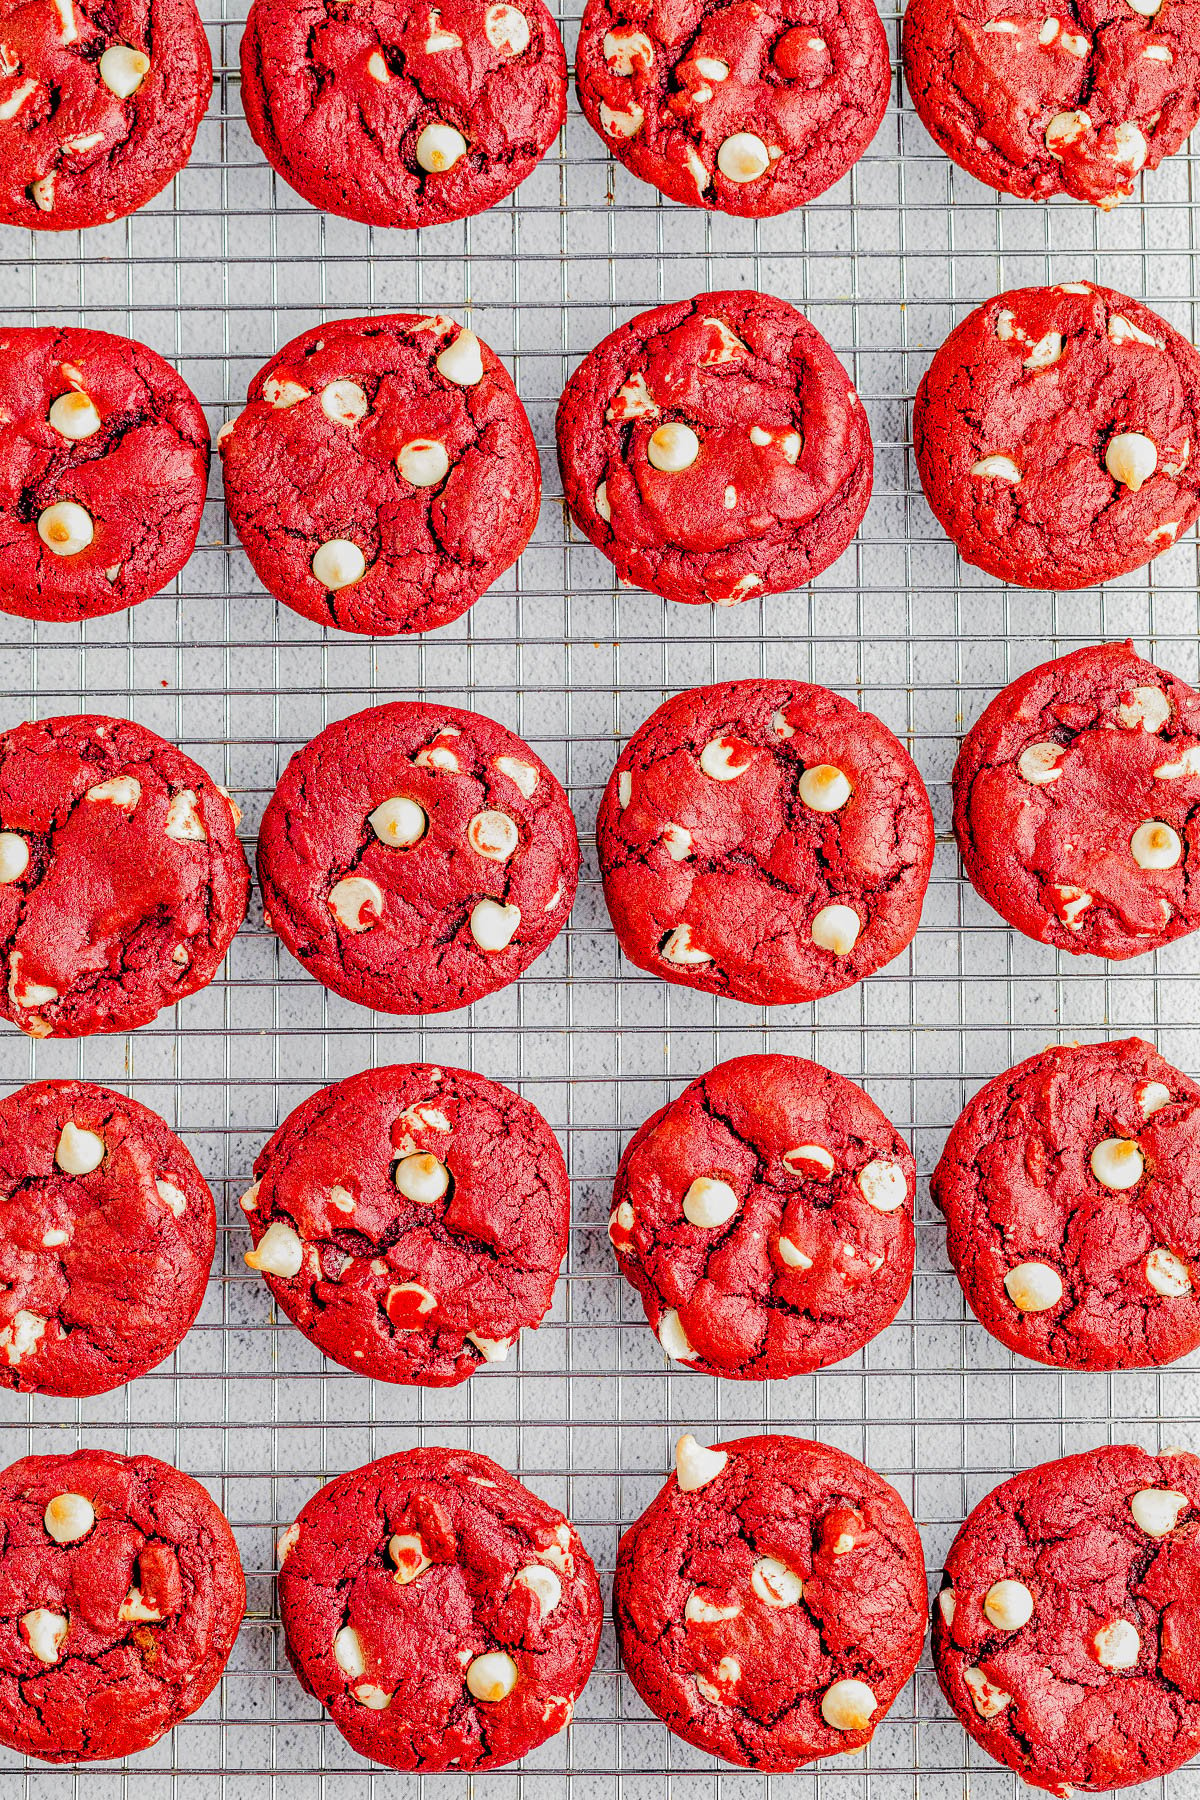 Red Velvet Cookies — Soft and chewy red velvet cookies that are loaded with white chocolate chips in every bite! A classic from-scratch red velvet cookie recipe that’s made in one bowl and EASY to make with PERFECT results every time! Perfect for Valentine’s Day, Christmas, or anytime you’re craving red velvet because these come together in no time and everyone LOVES them!